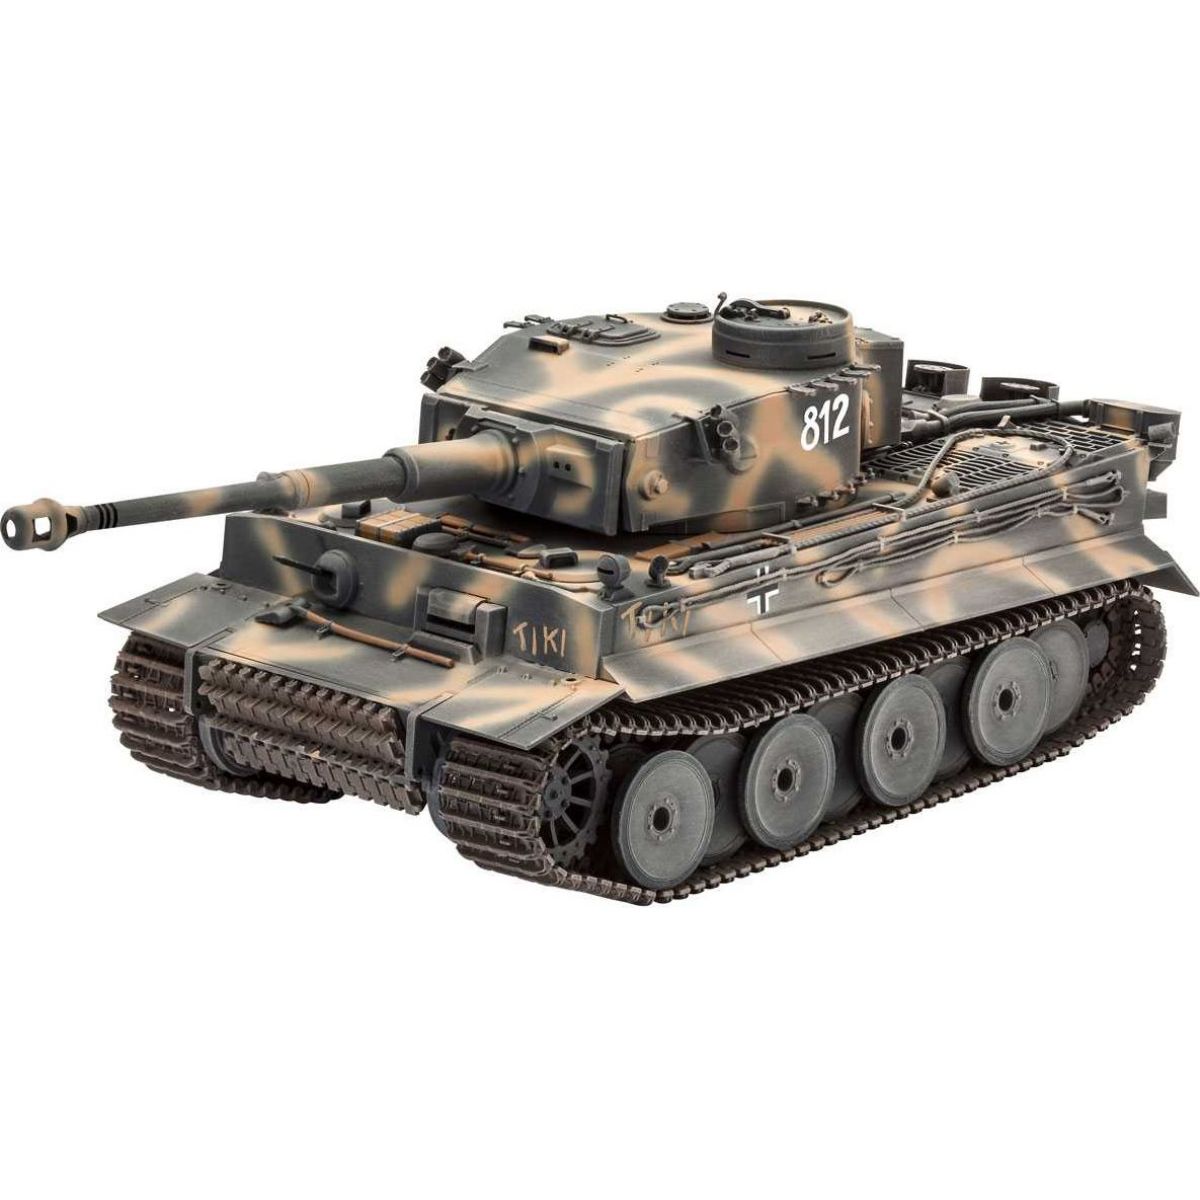 Revell Gift-Set tank 05790 75 Years Tiger I 1:35